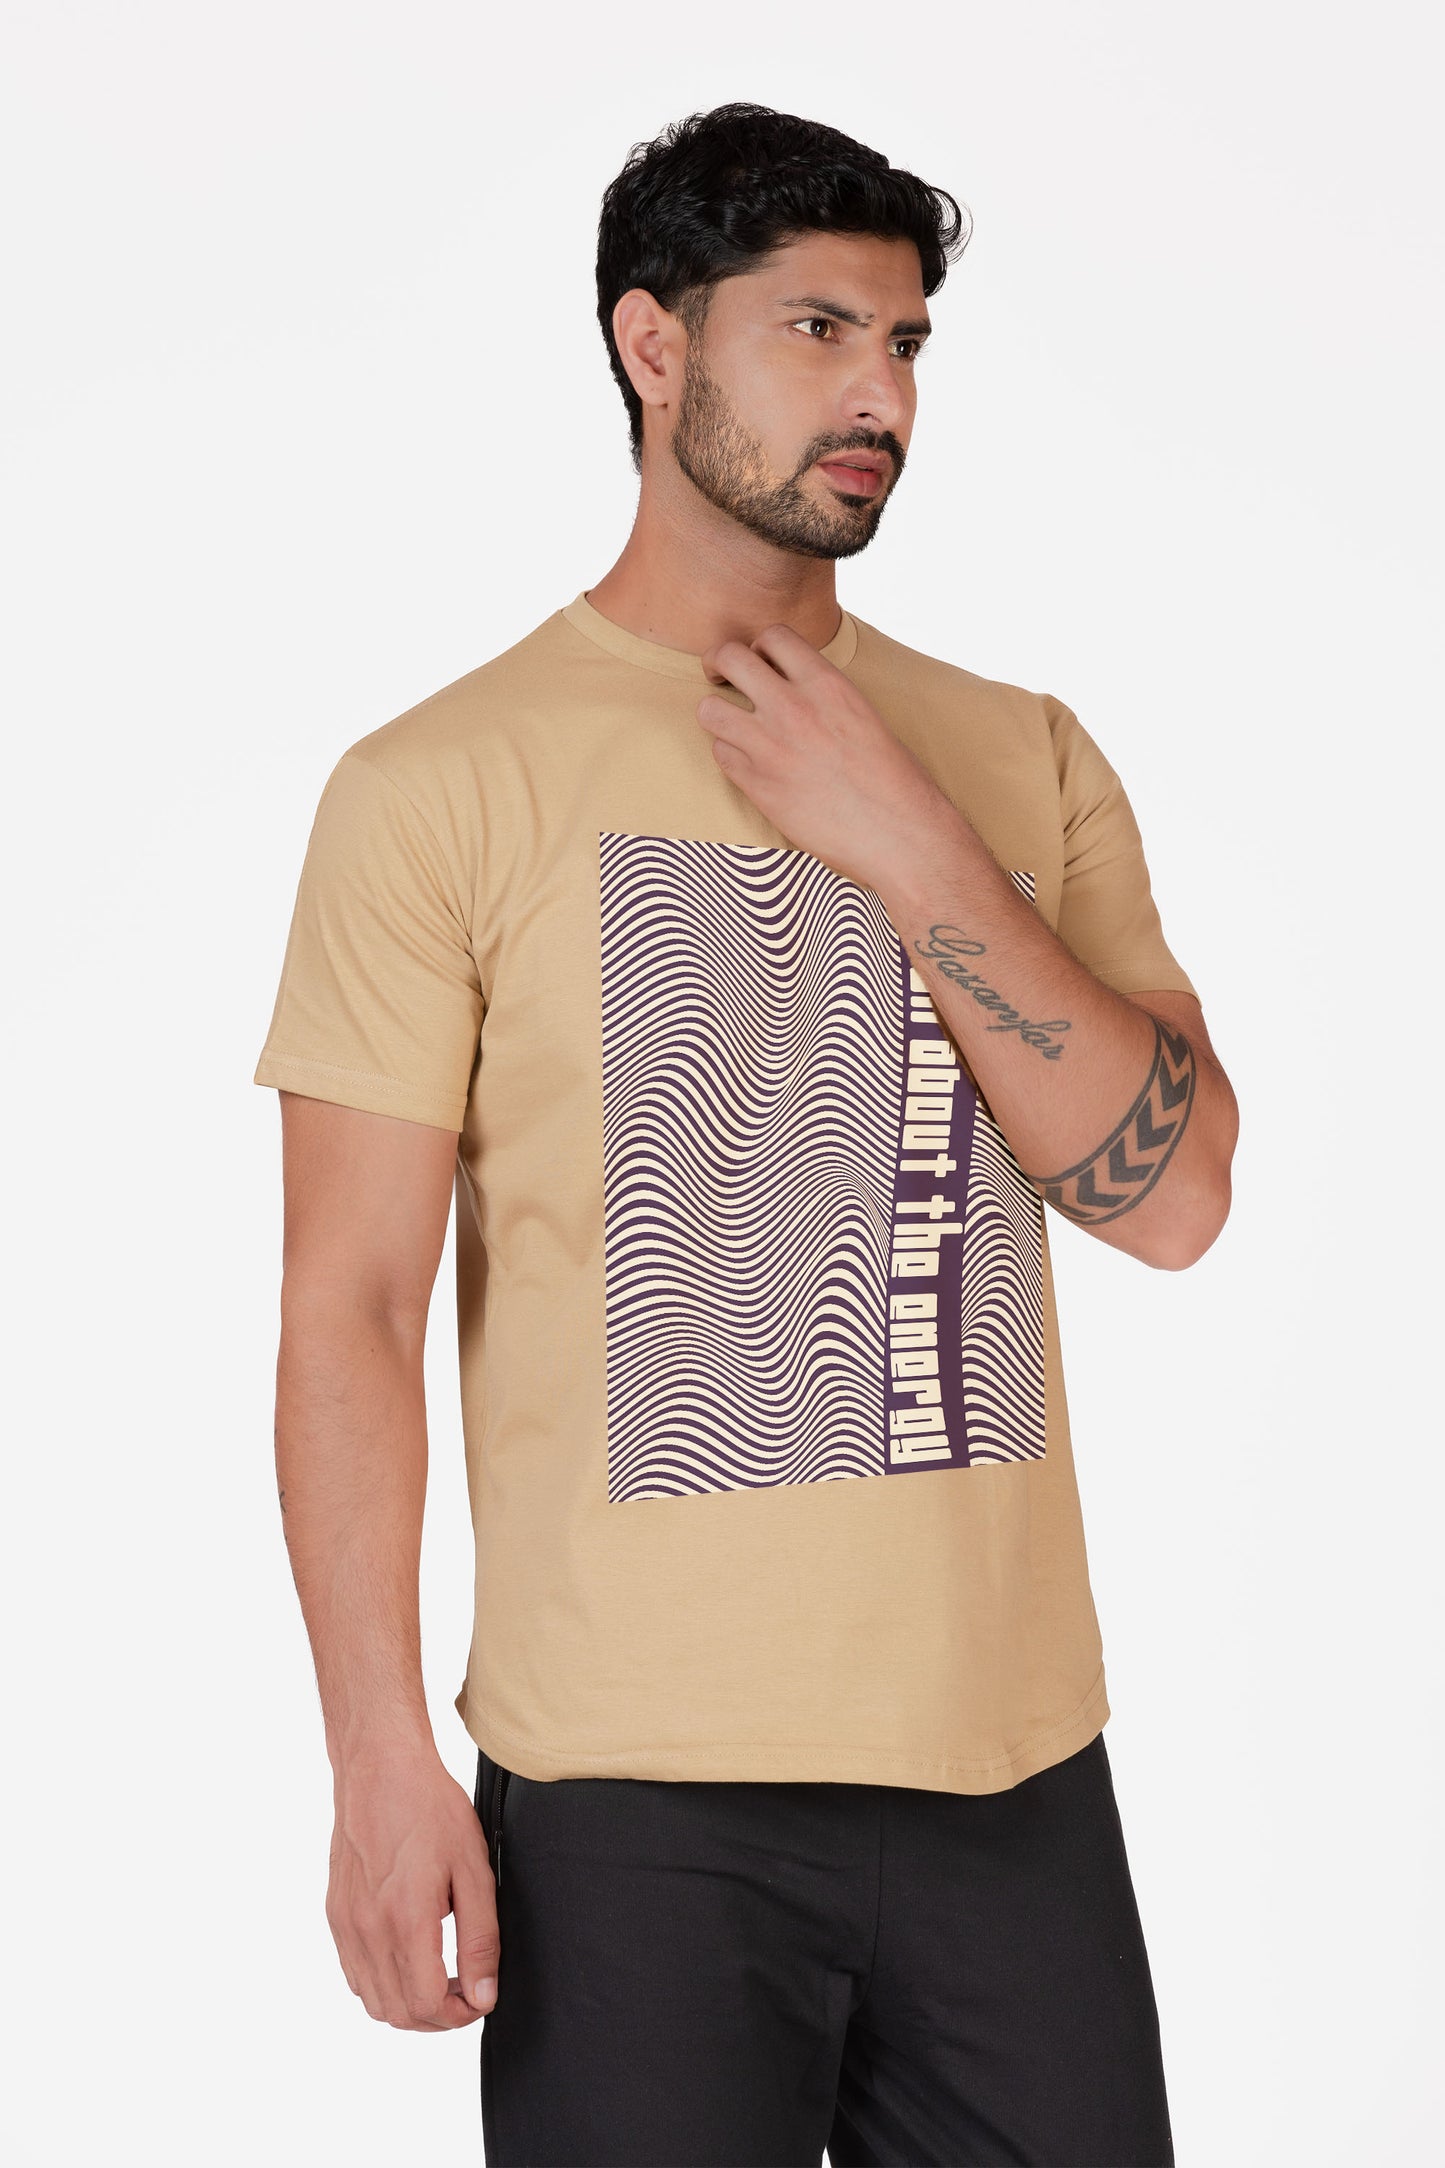 It's All About The Energy Organic Longline Cotton T-shirt - keos.life